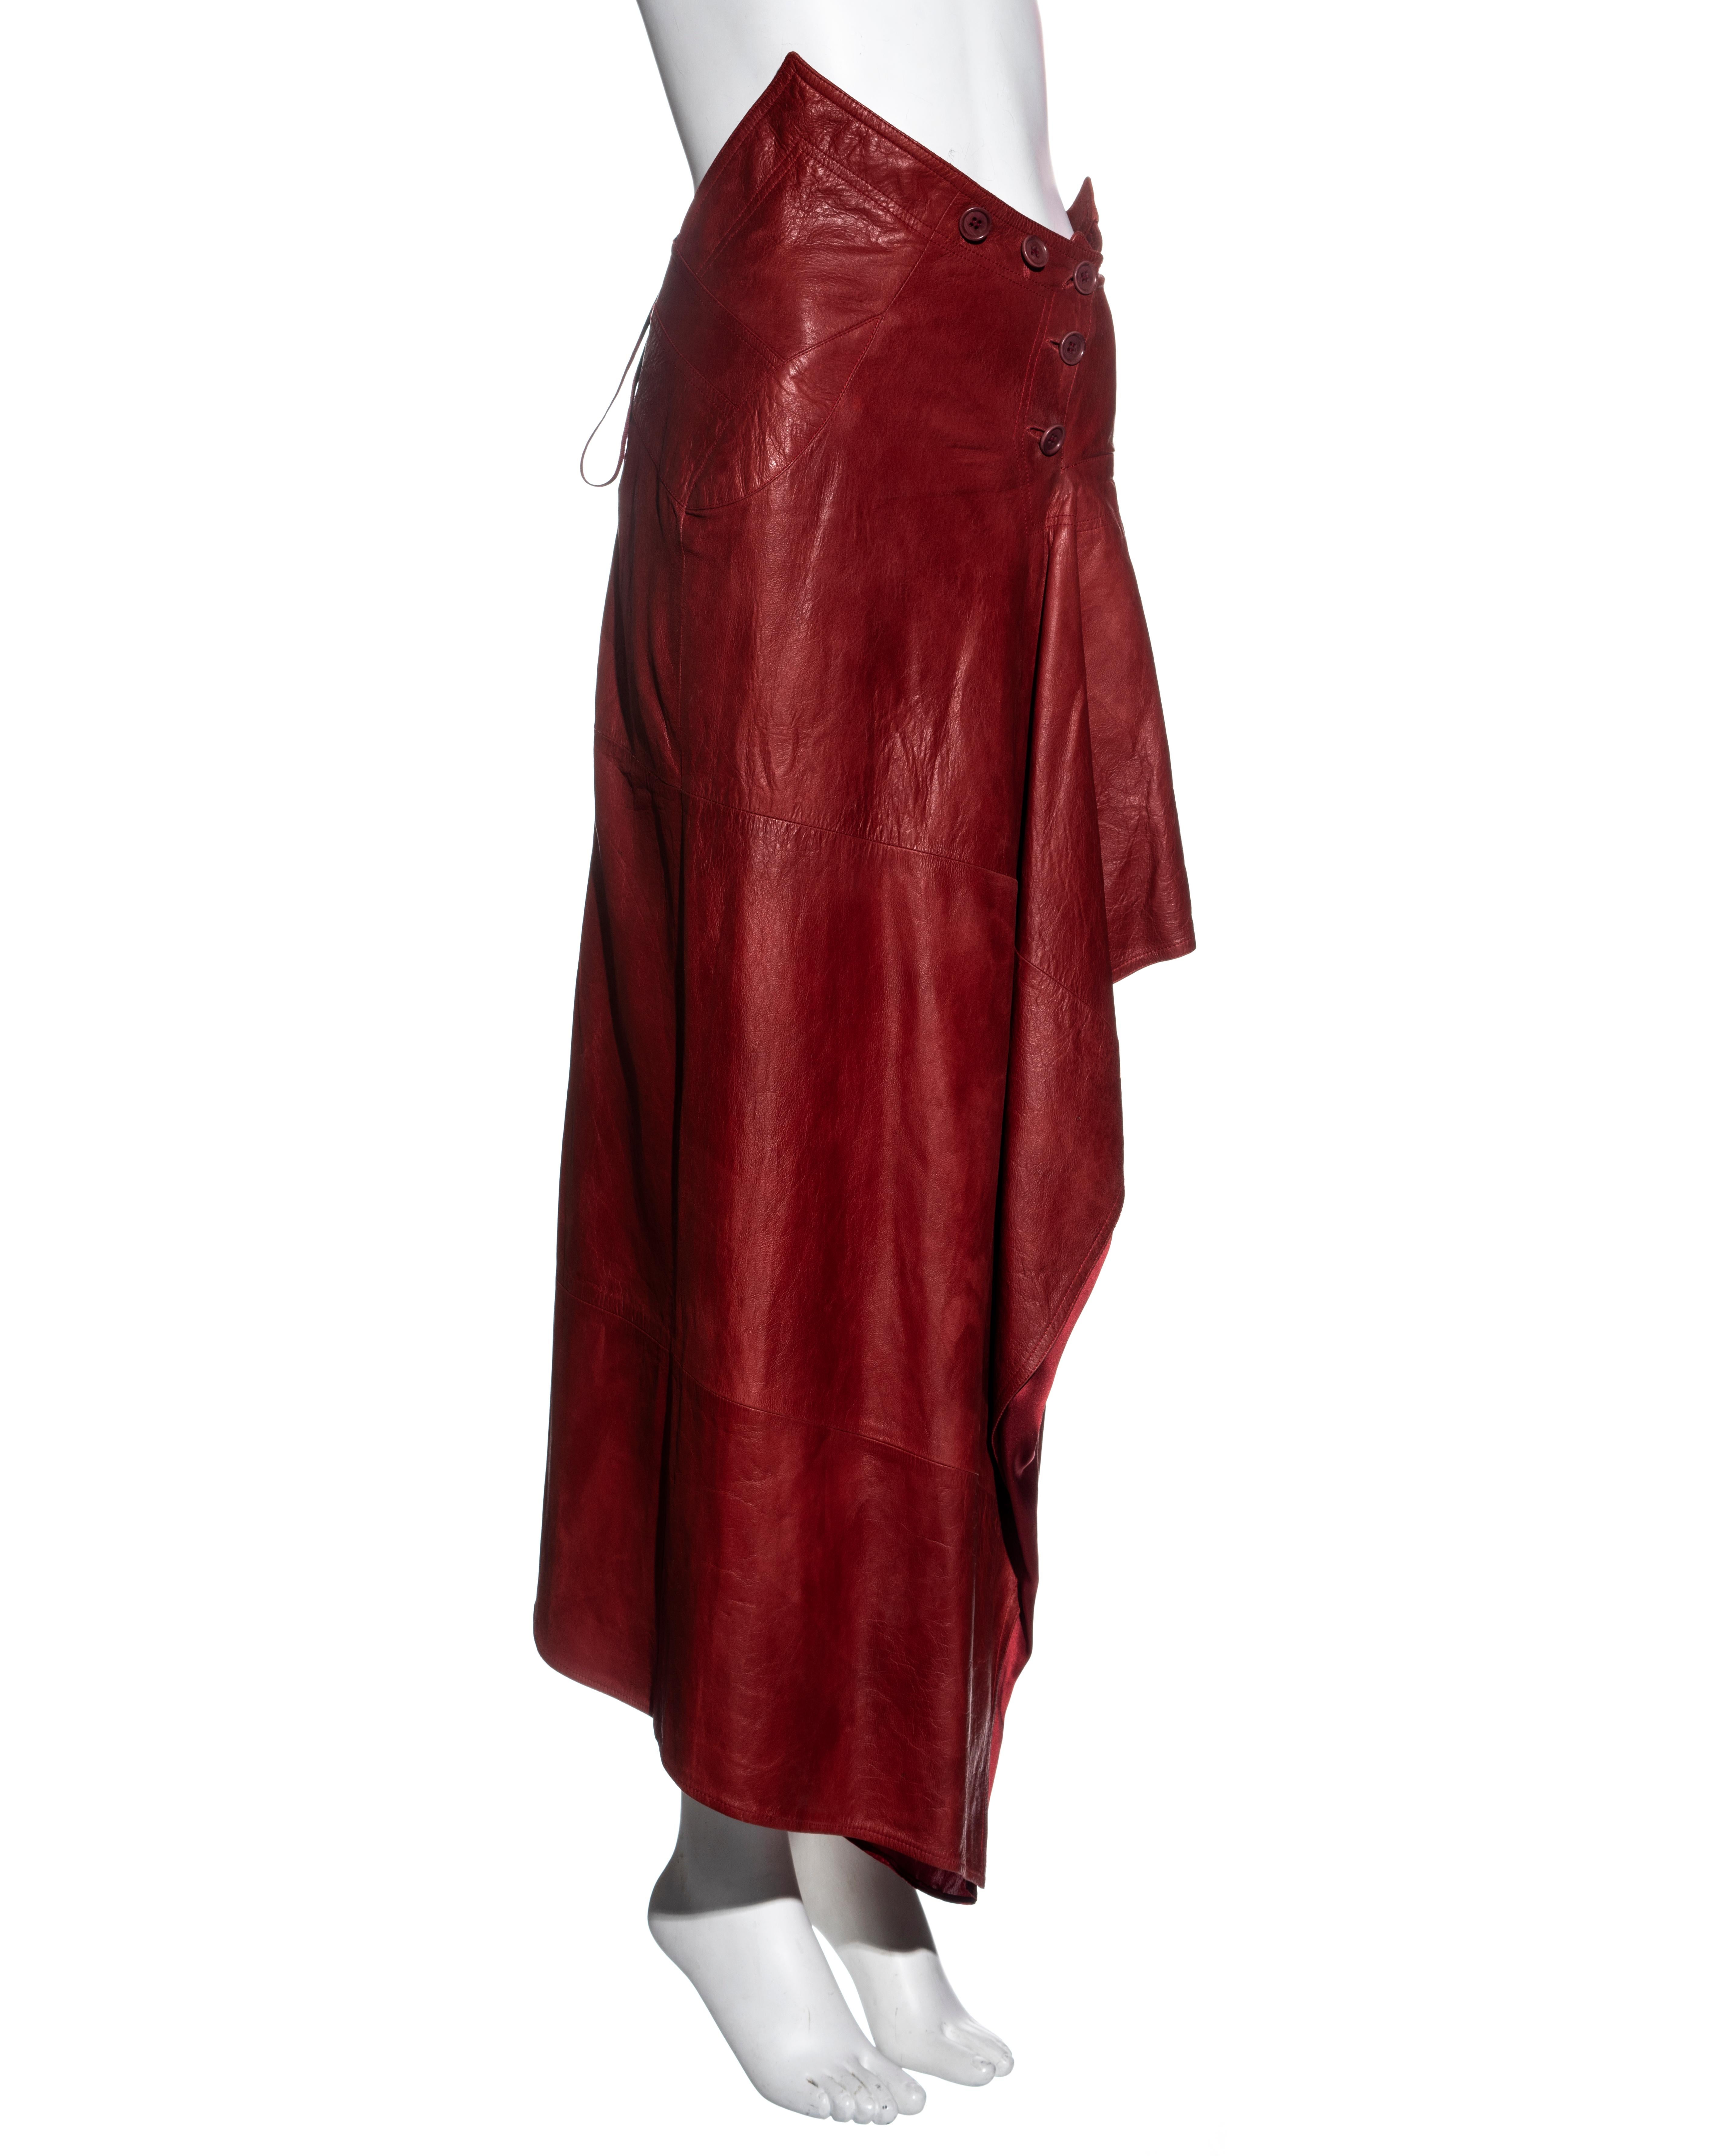 Christian Dior by John Galliano red leather asymmetric cut skirt, ss 2000 1